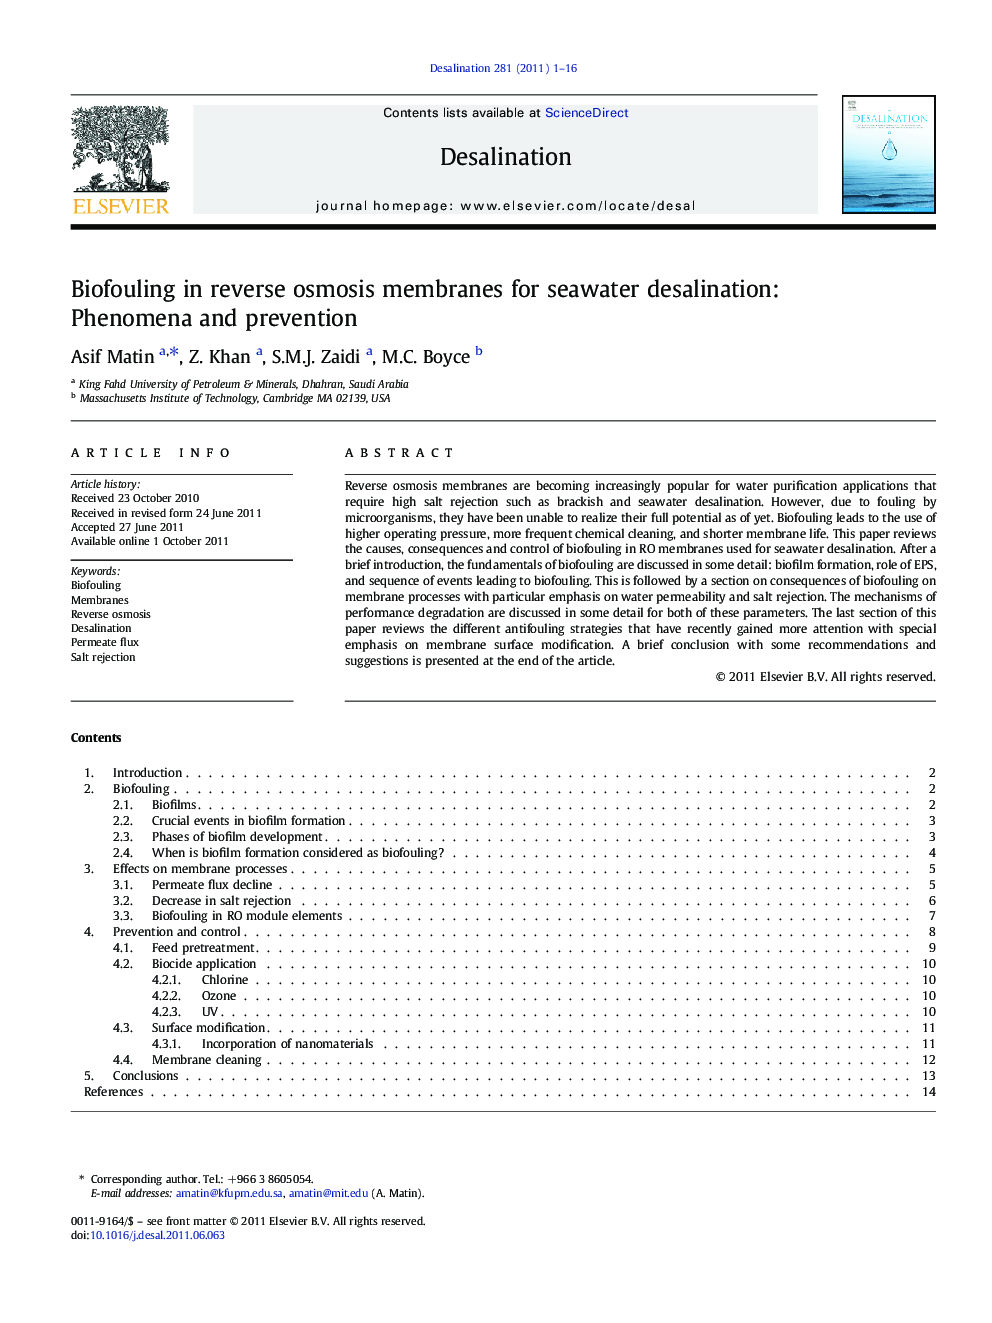 Biofouling in reverse osmosis membranes for seawater desalination: Phenomena and prevention